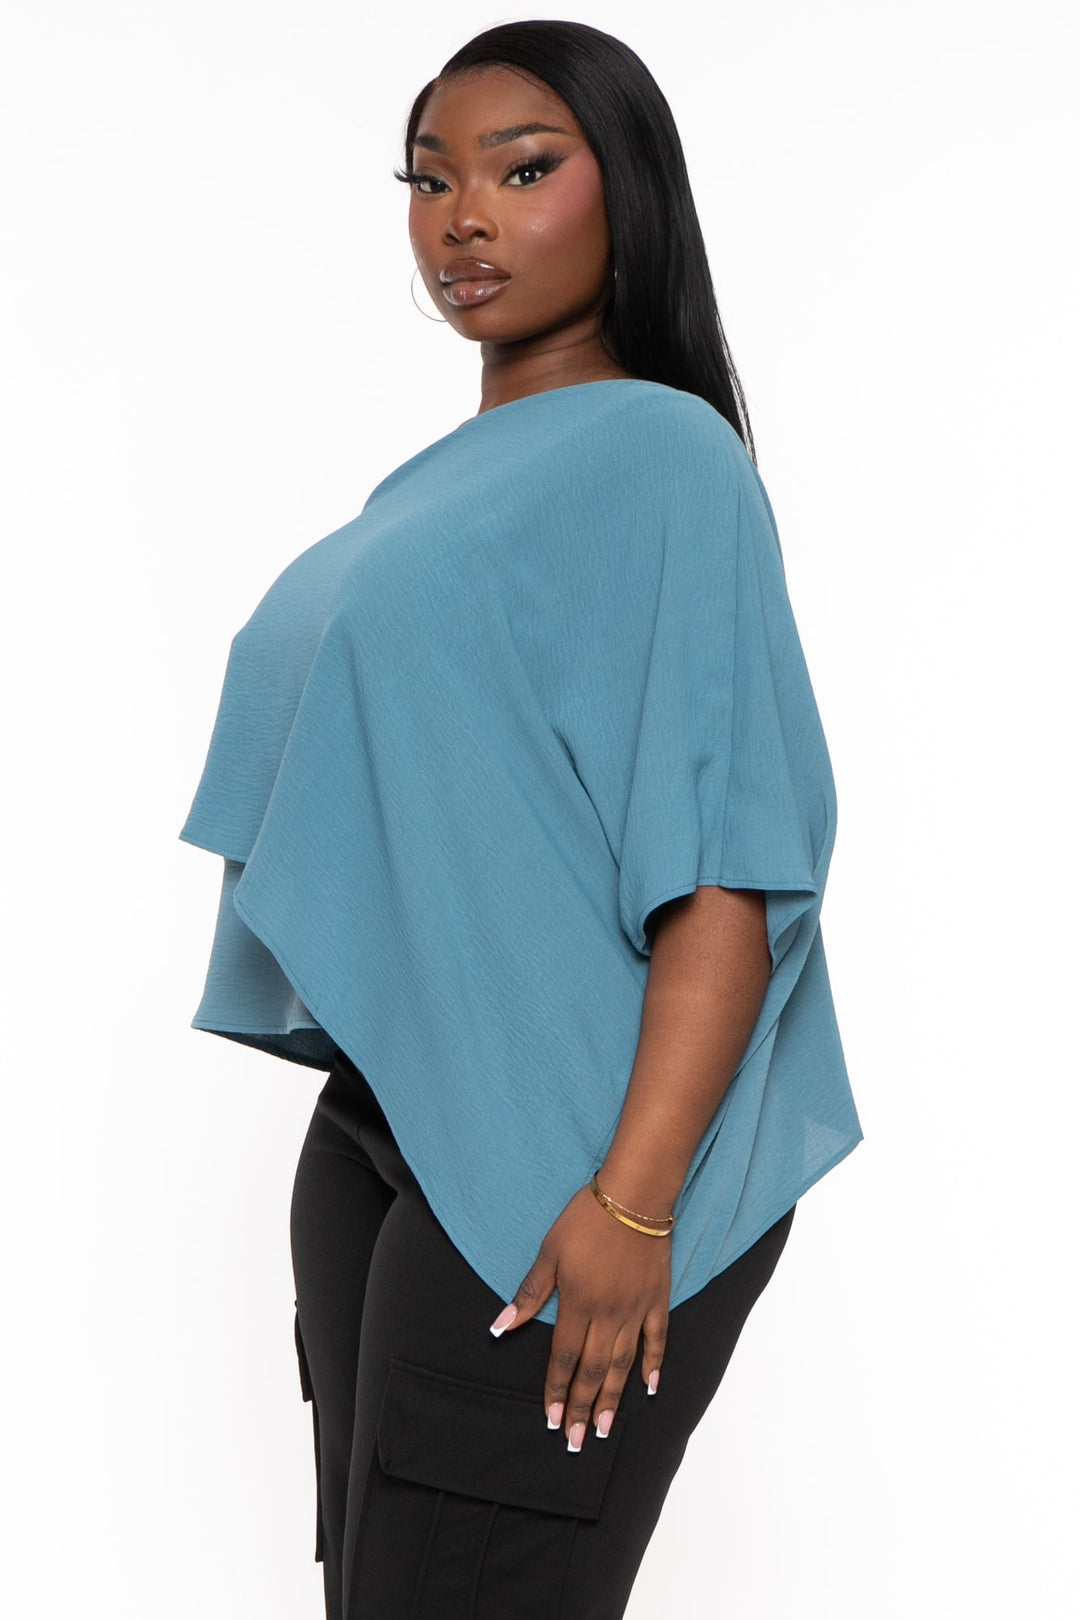 Jade by Jane Tops Plus Size Lexi One Shoulder Top- Teal